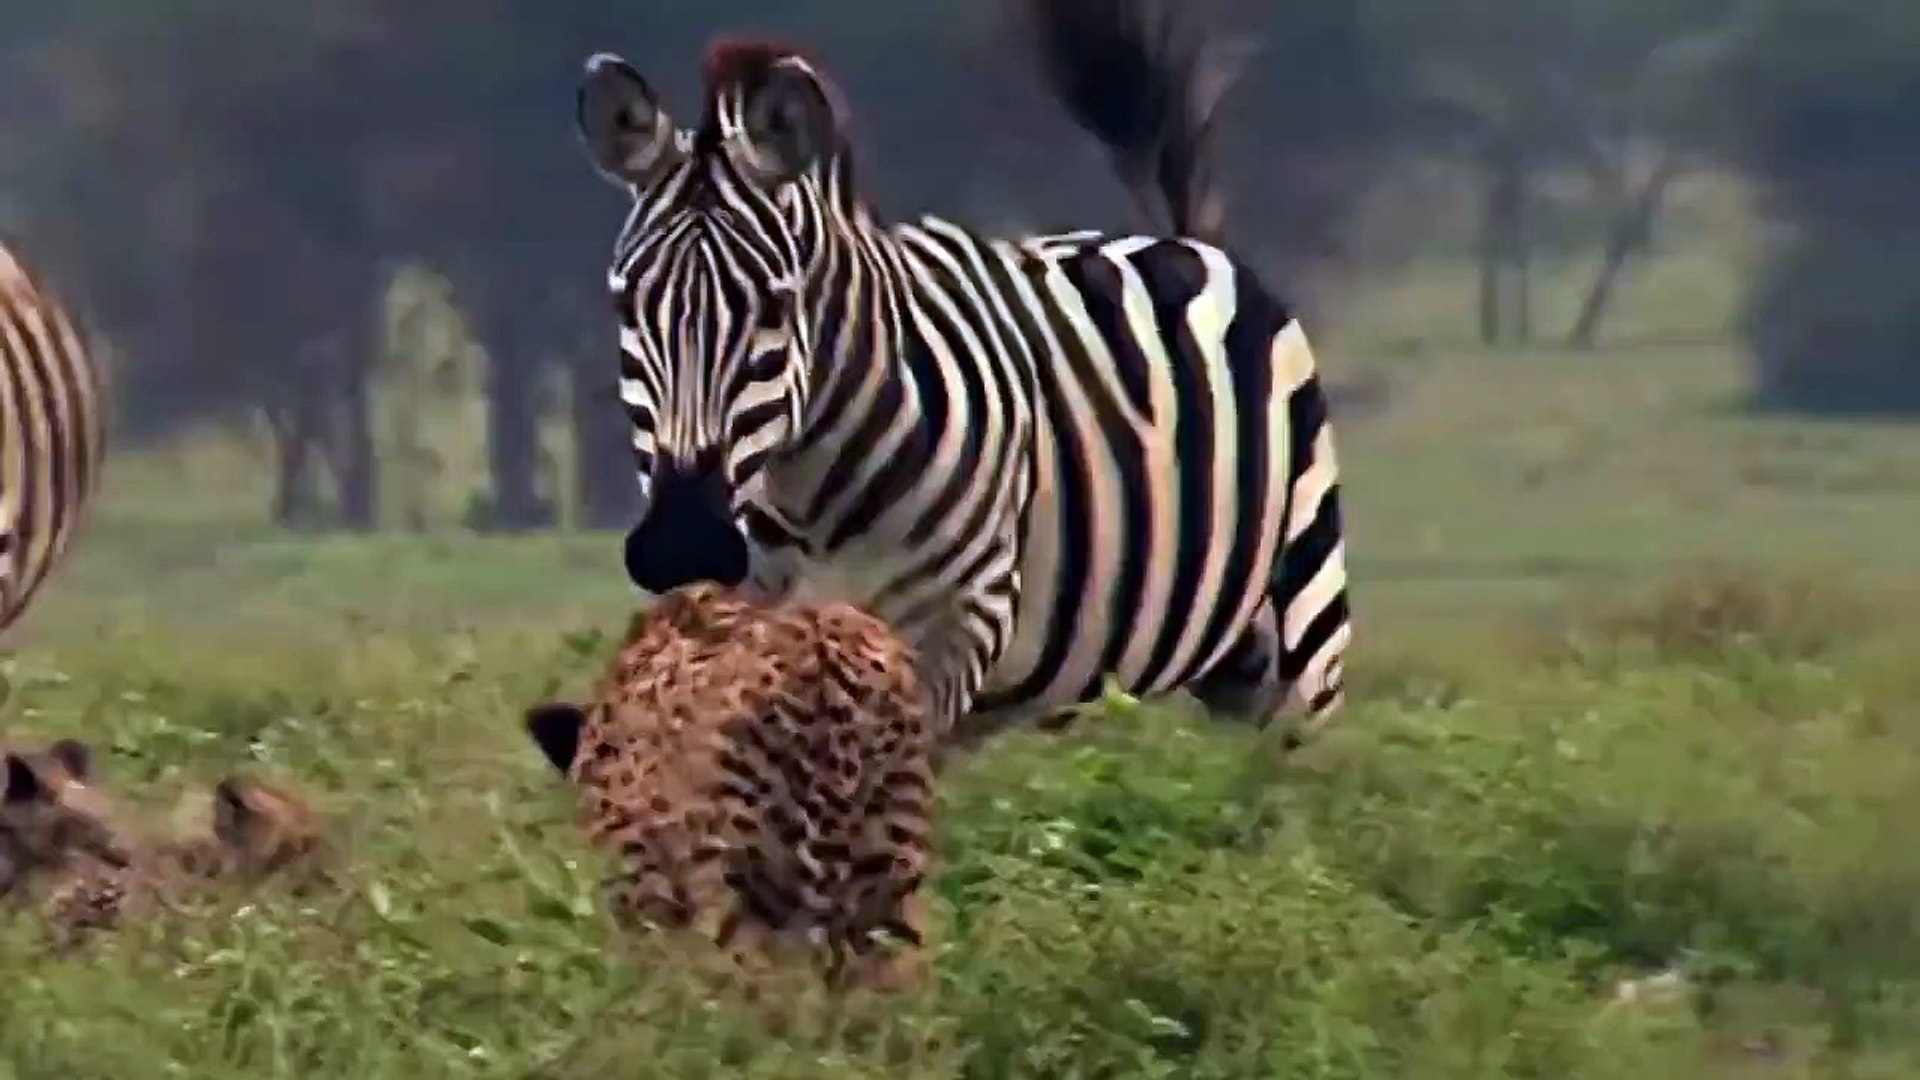 Mother Ostrich Fights Very Hard To Protect Her Baby, But To No Avail - Ostrich Vs Cheetah, Zebra